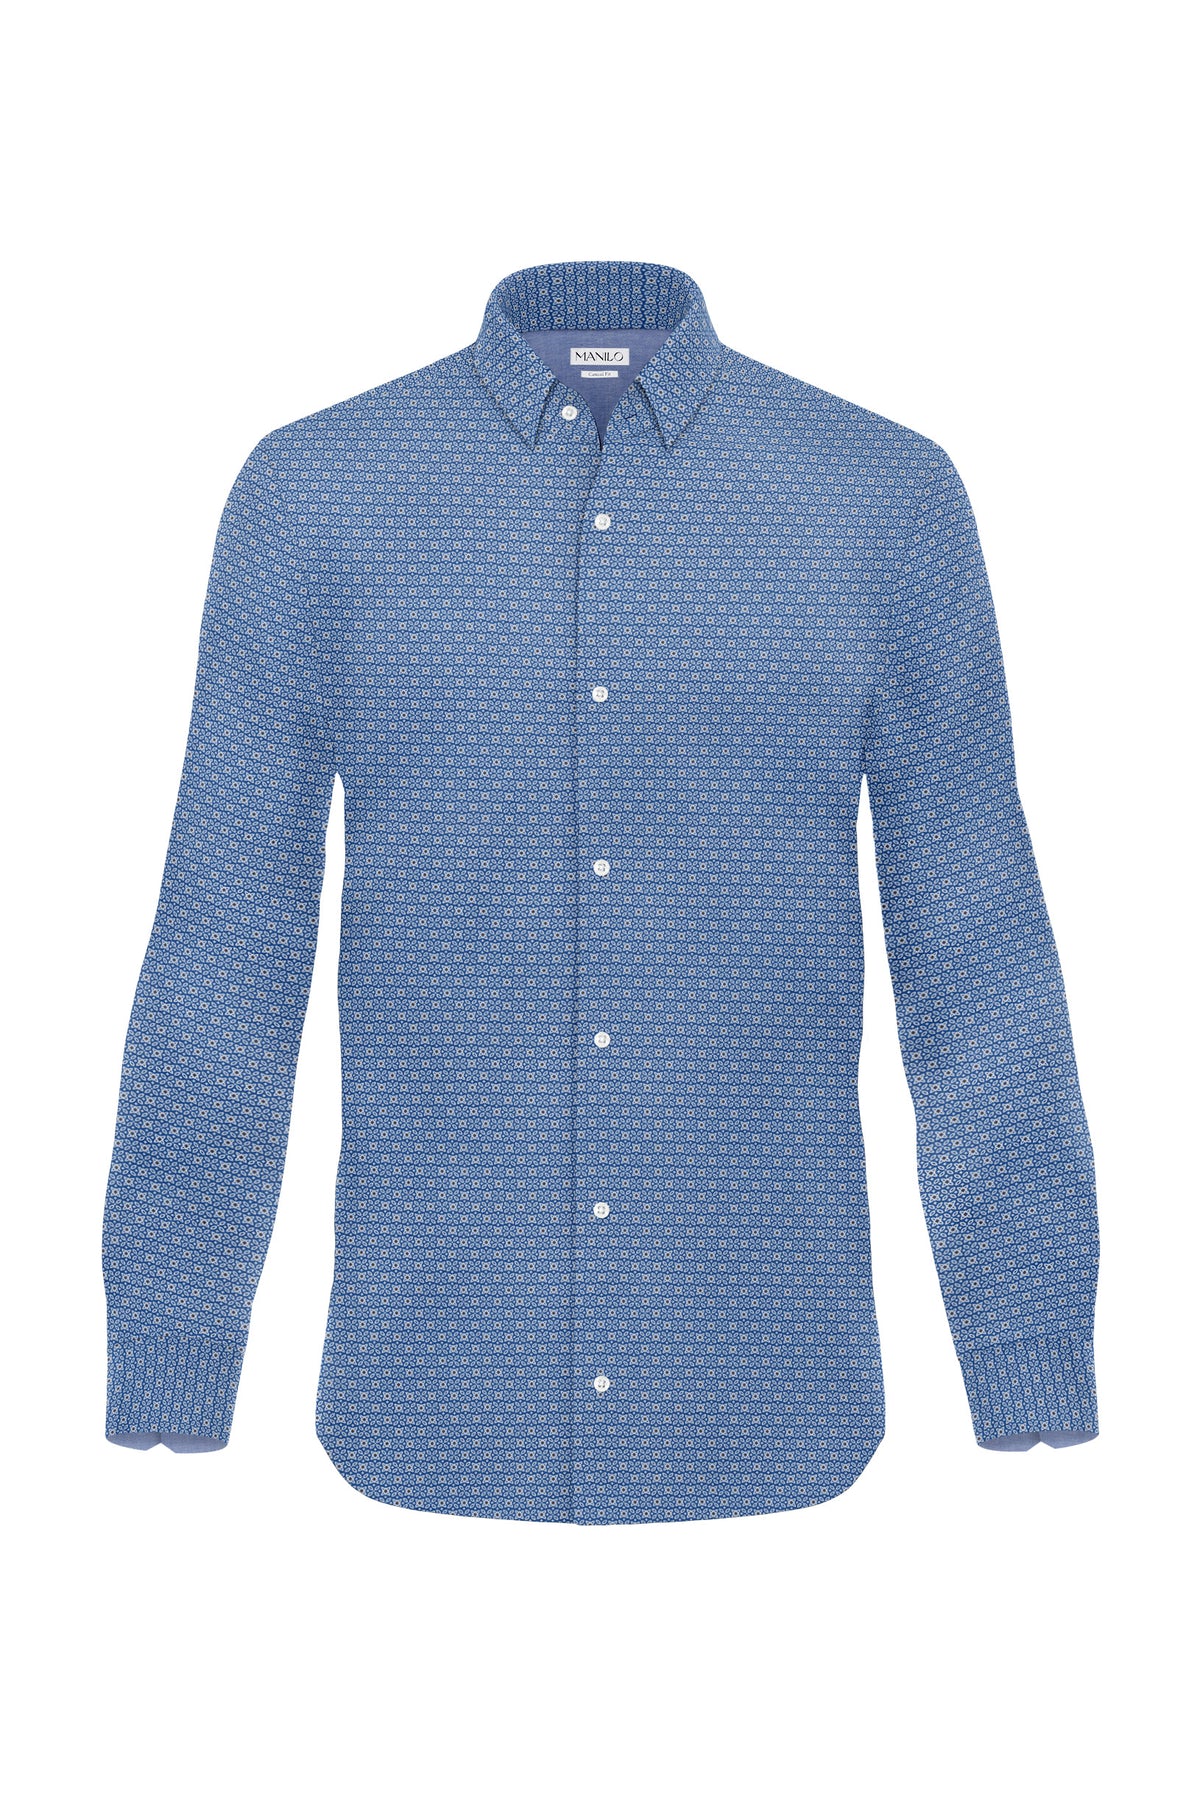 Casual shirt with graphic pattern in navy/brown (Art. 2238-C)